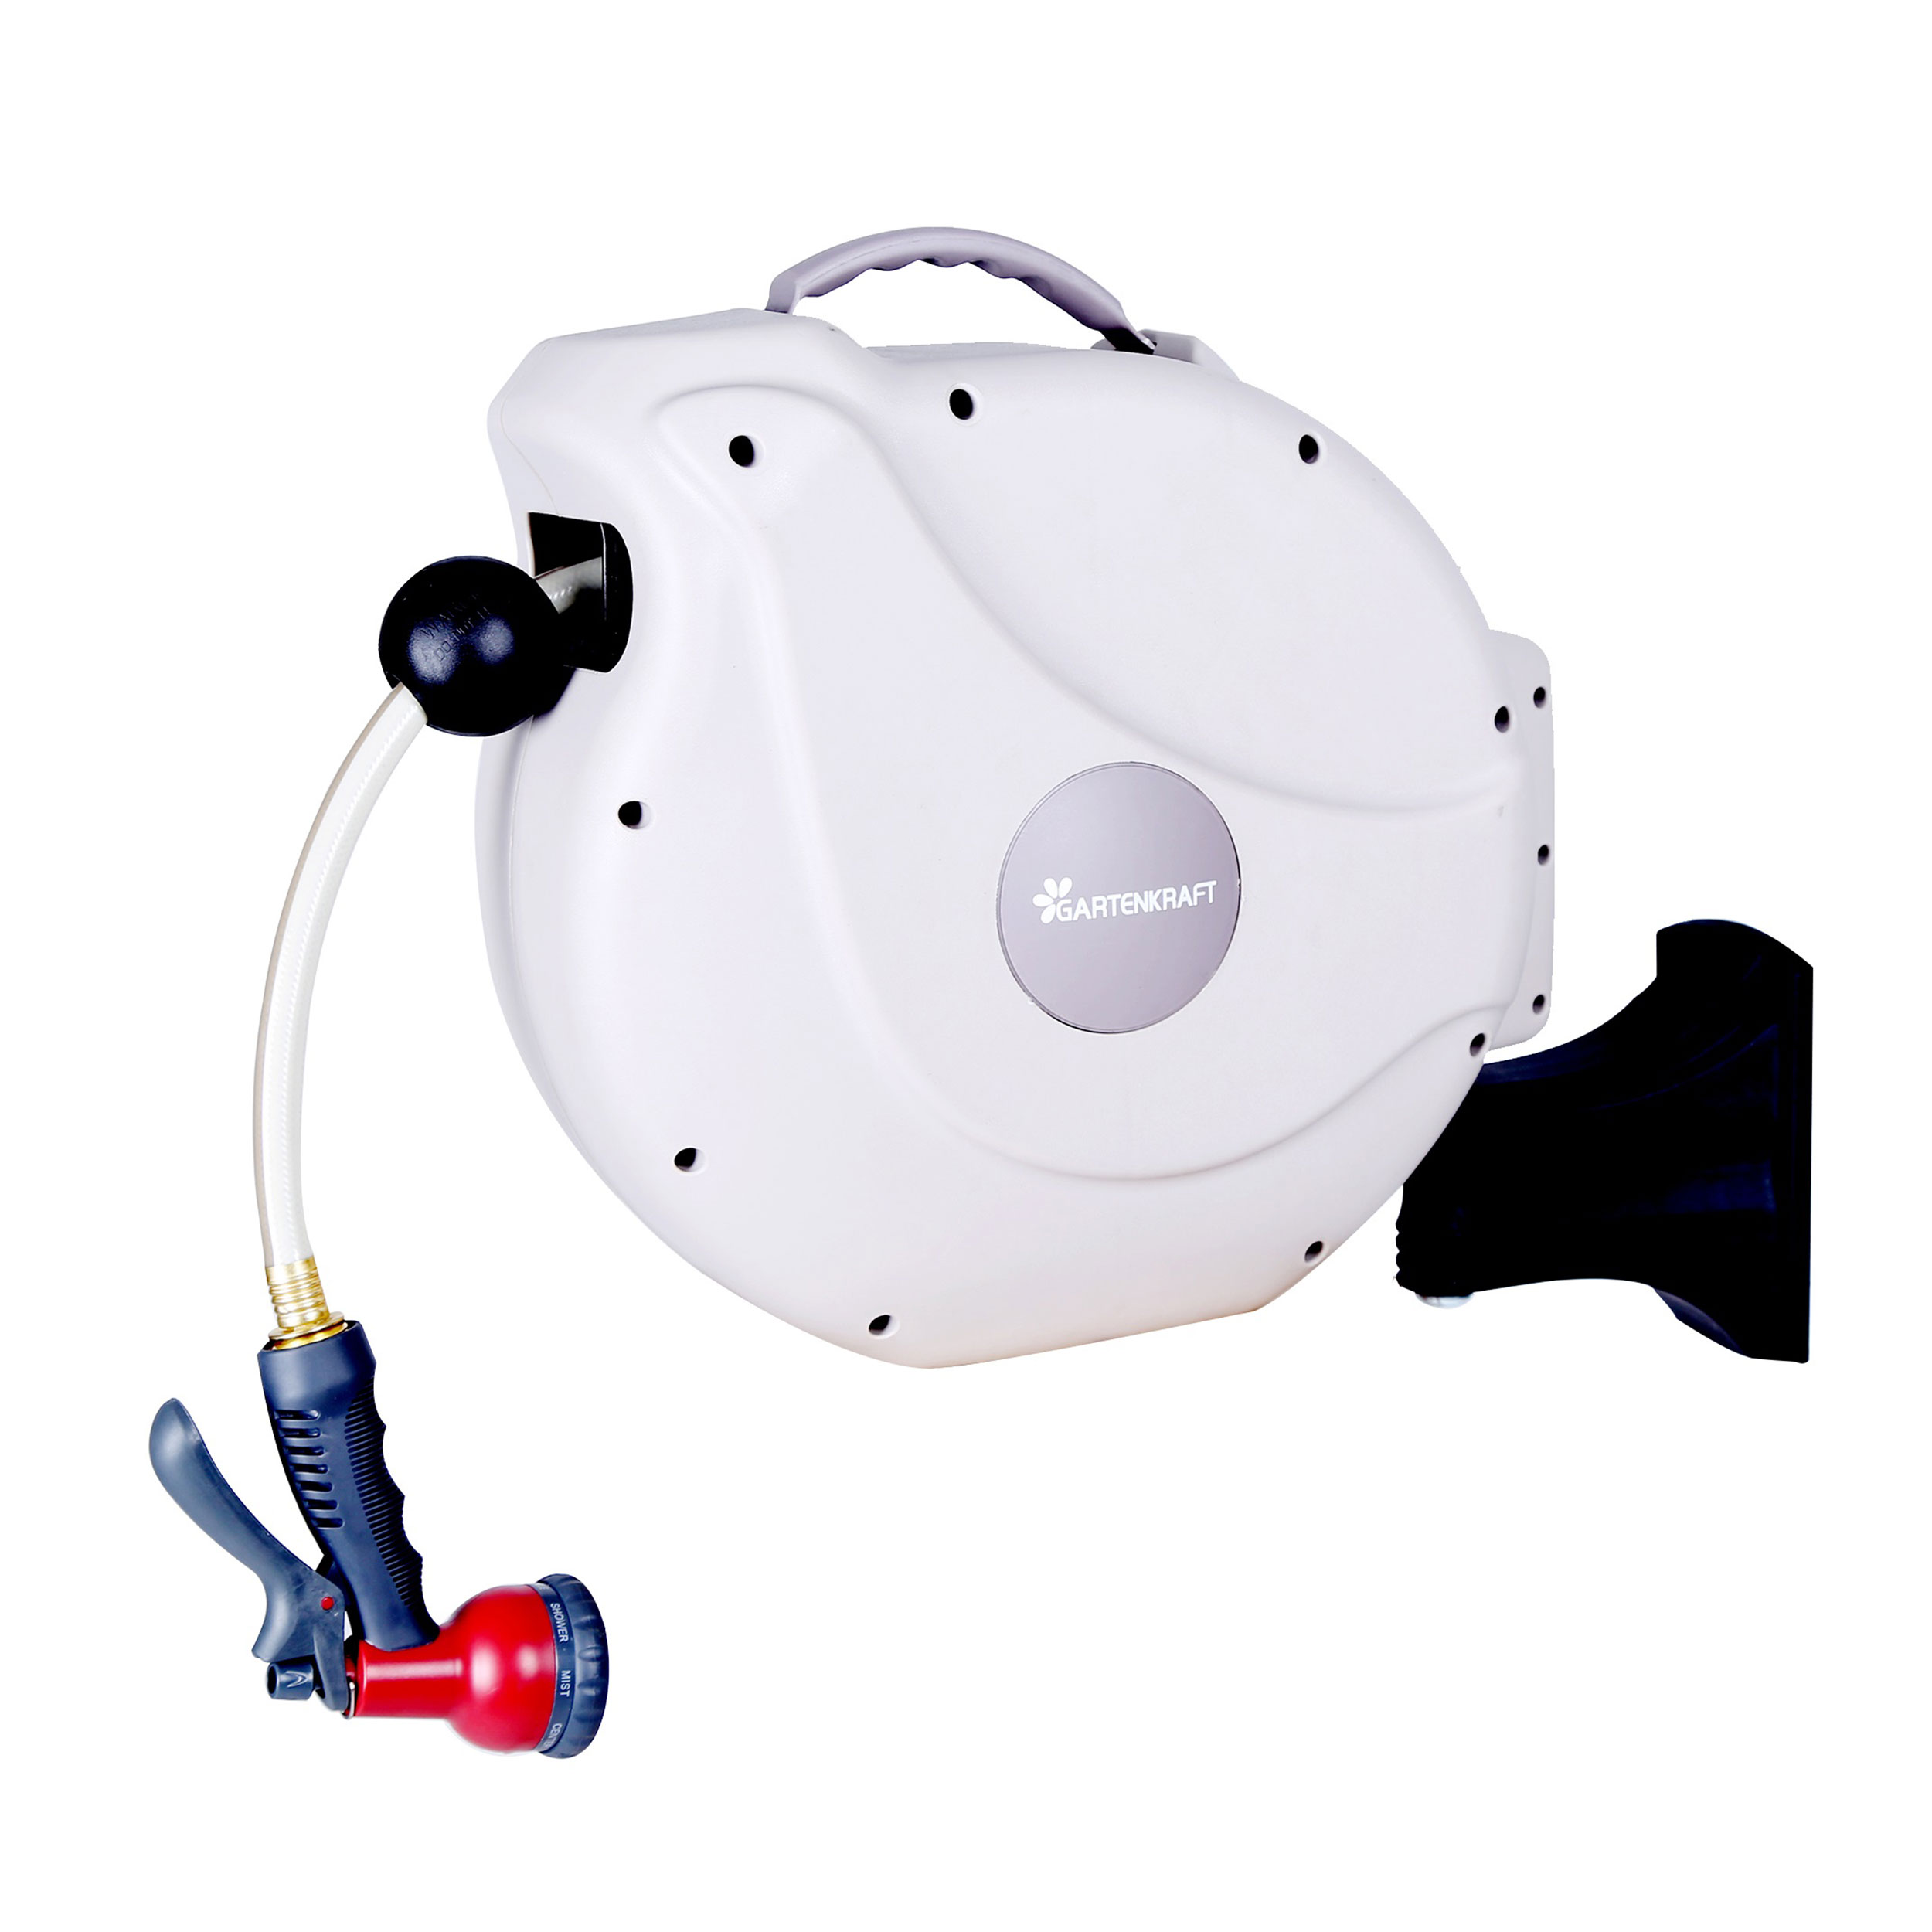 Retractable Nw Hose Reel, 1/2", 82ft